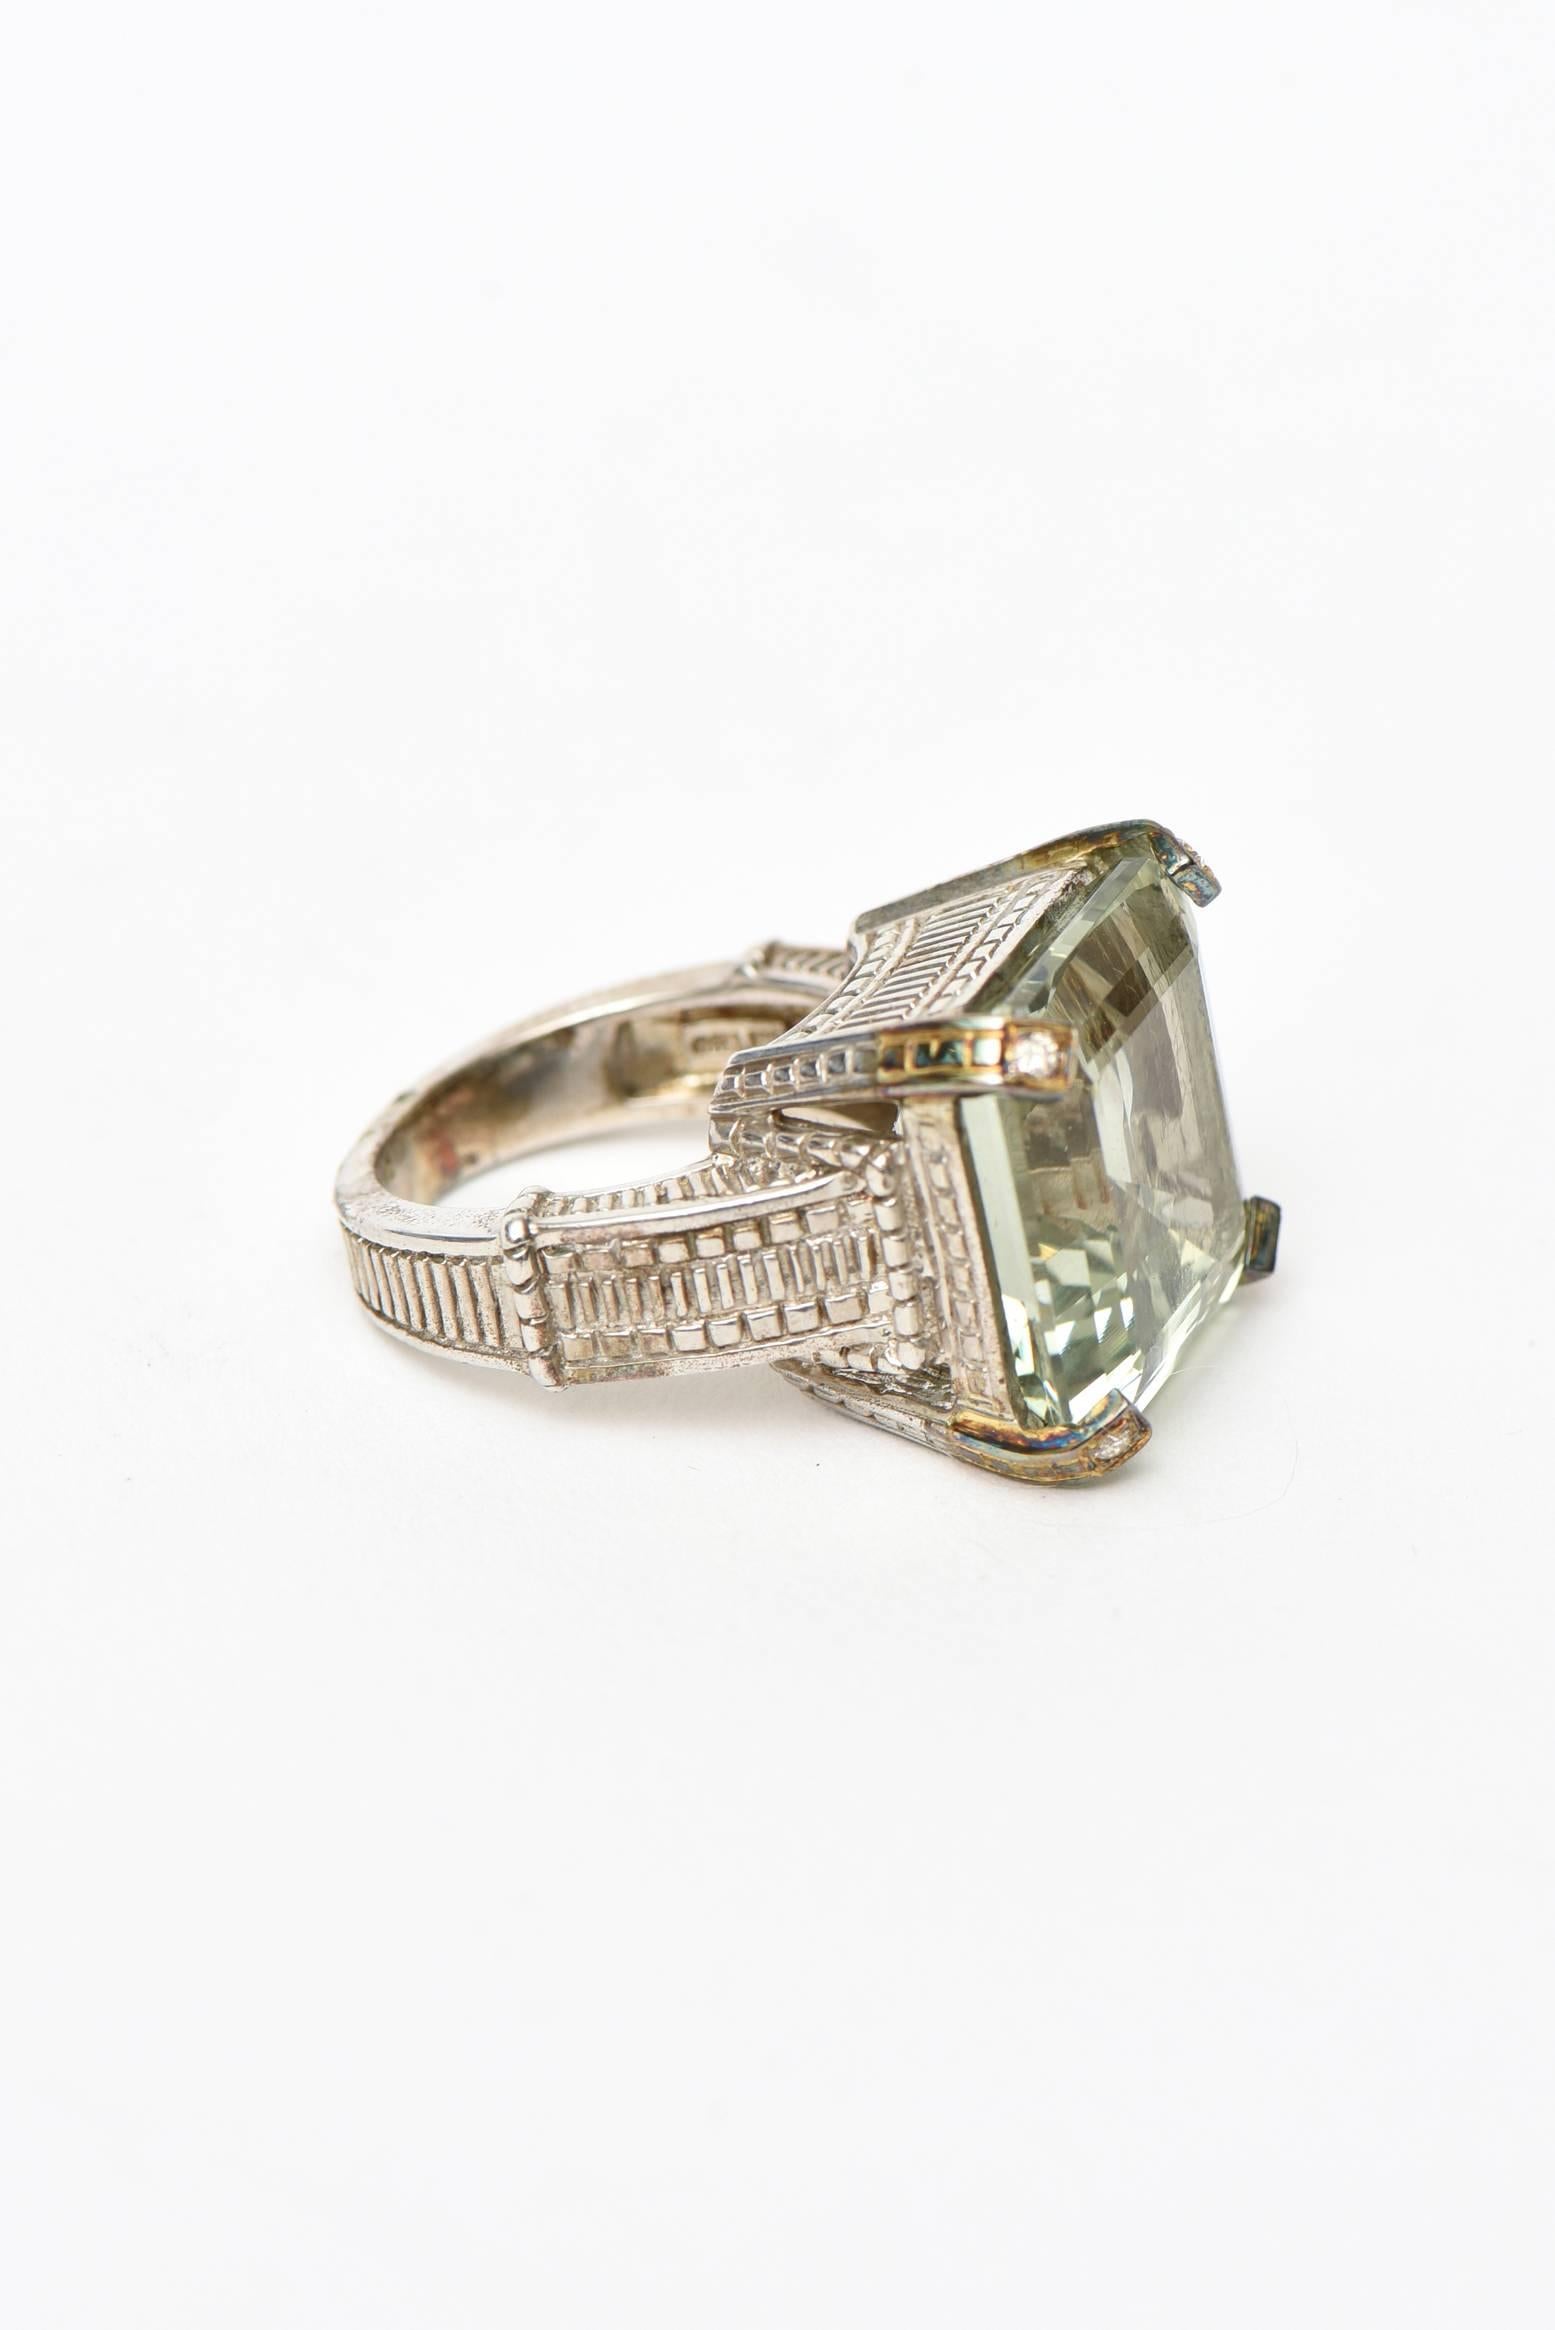 This classic and gorgeous hallmarked Judith Ripka ring has a green faceted square amethyst and 4 tiny diamond on all 4 sides in a sterling silver and 18K white gold  setting. The diamonds are tiny points. It is contemporary and was done most likely